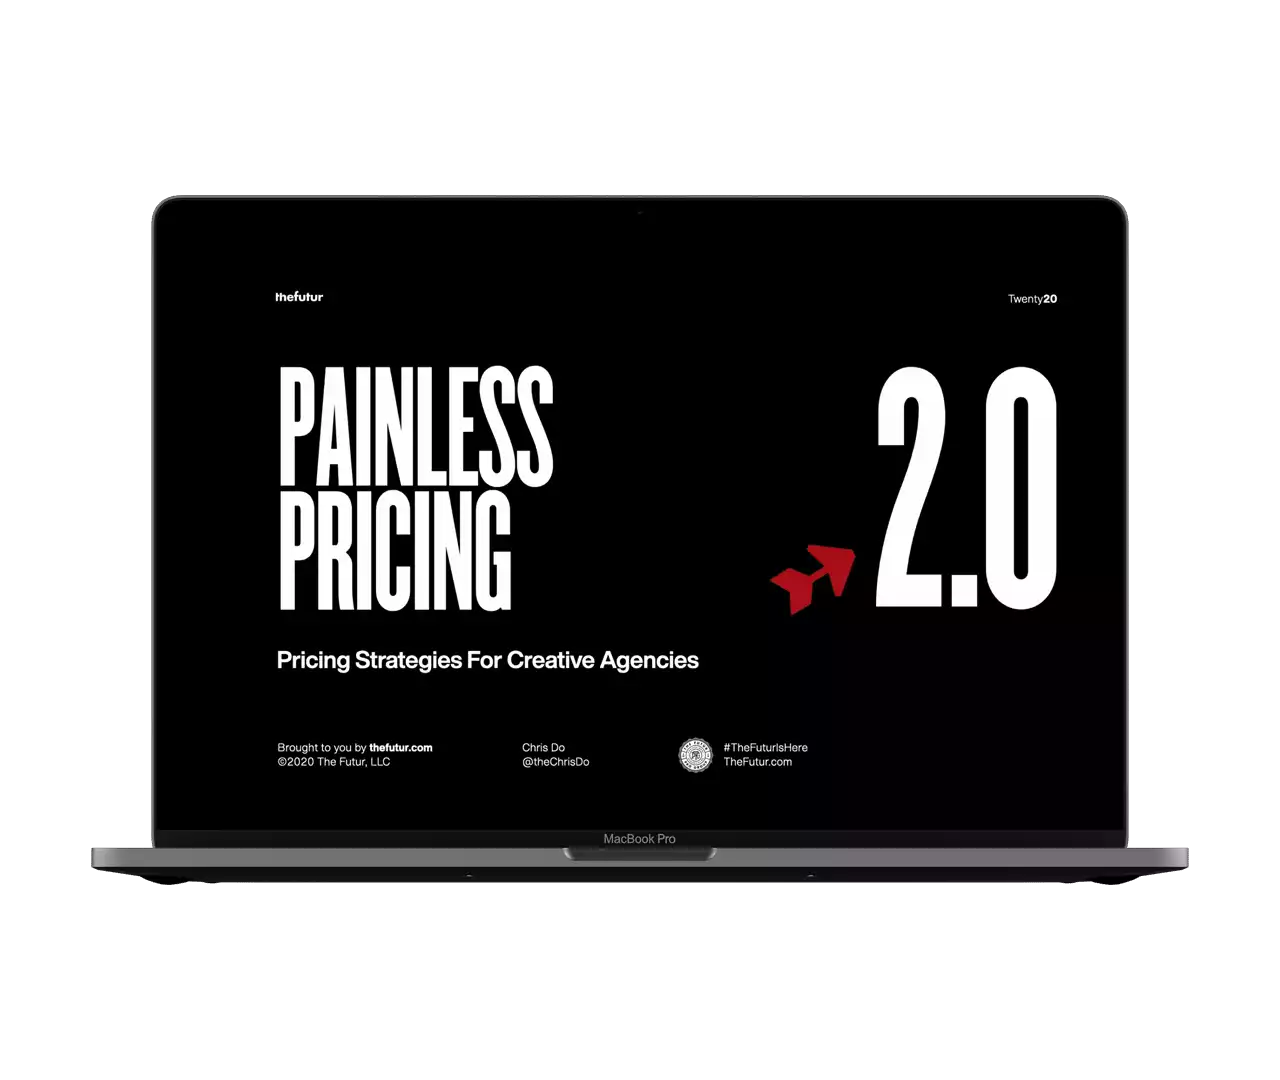 Painless Pricing from The Futur